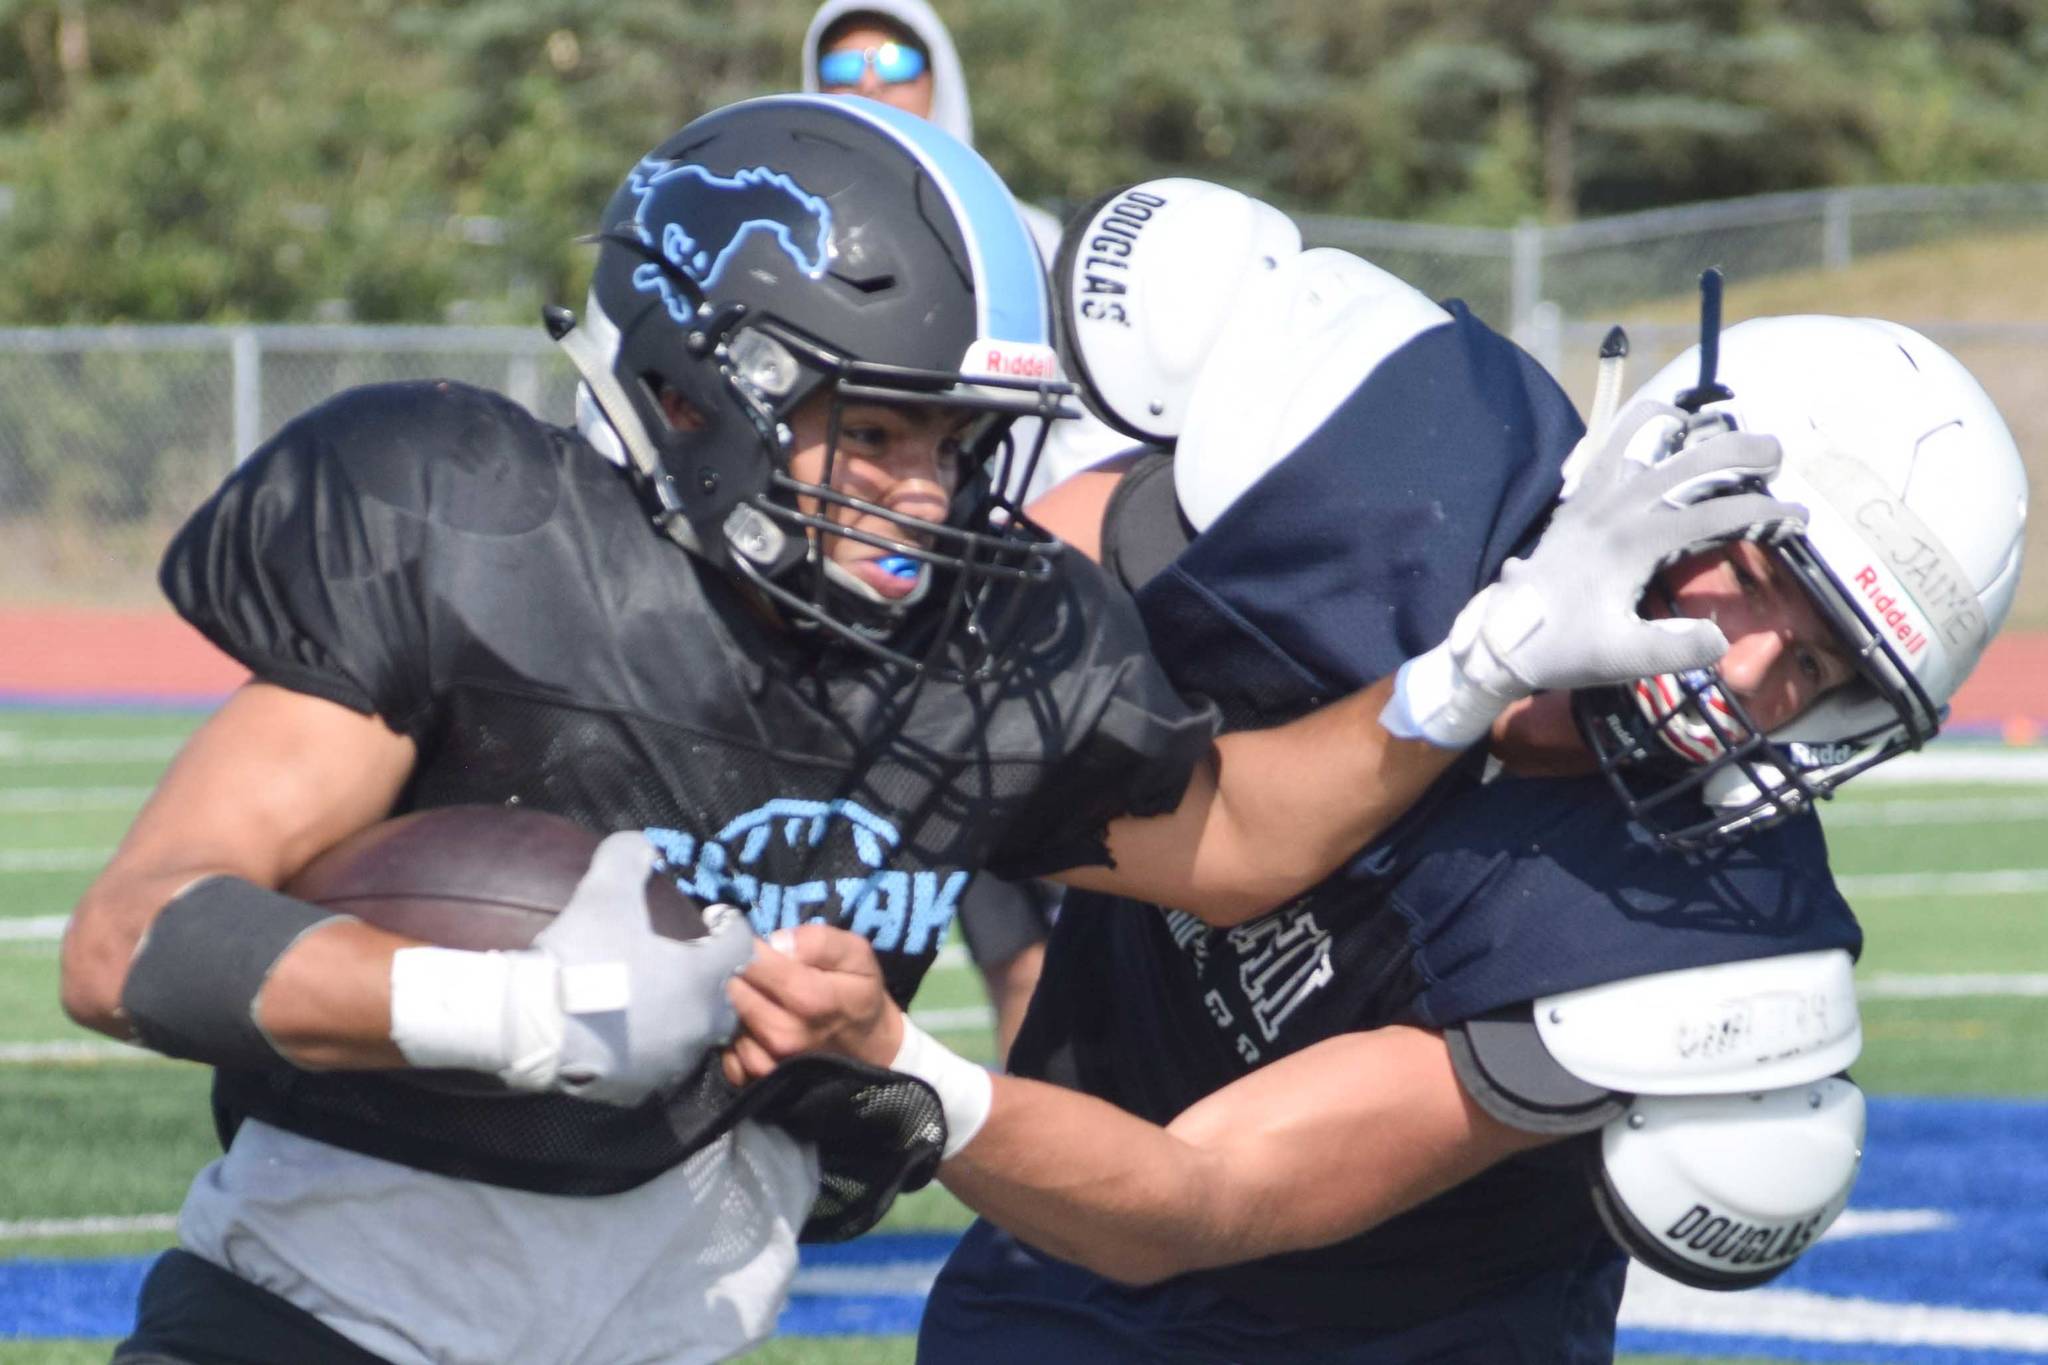 Simmering scrimmages: Prep football teams get ready for opening weekend